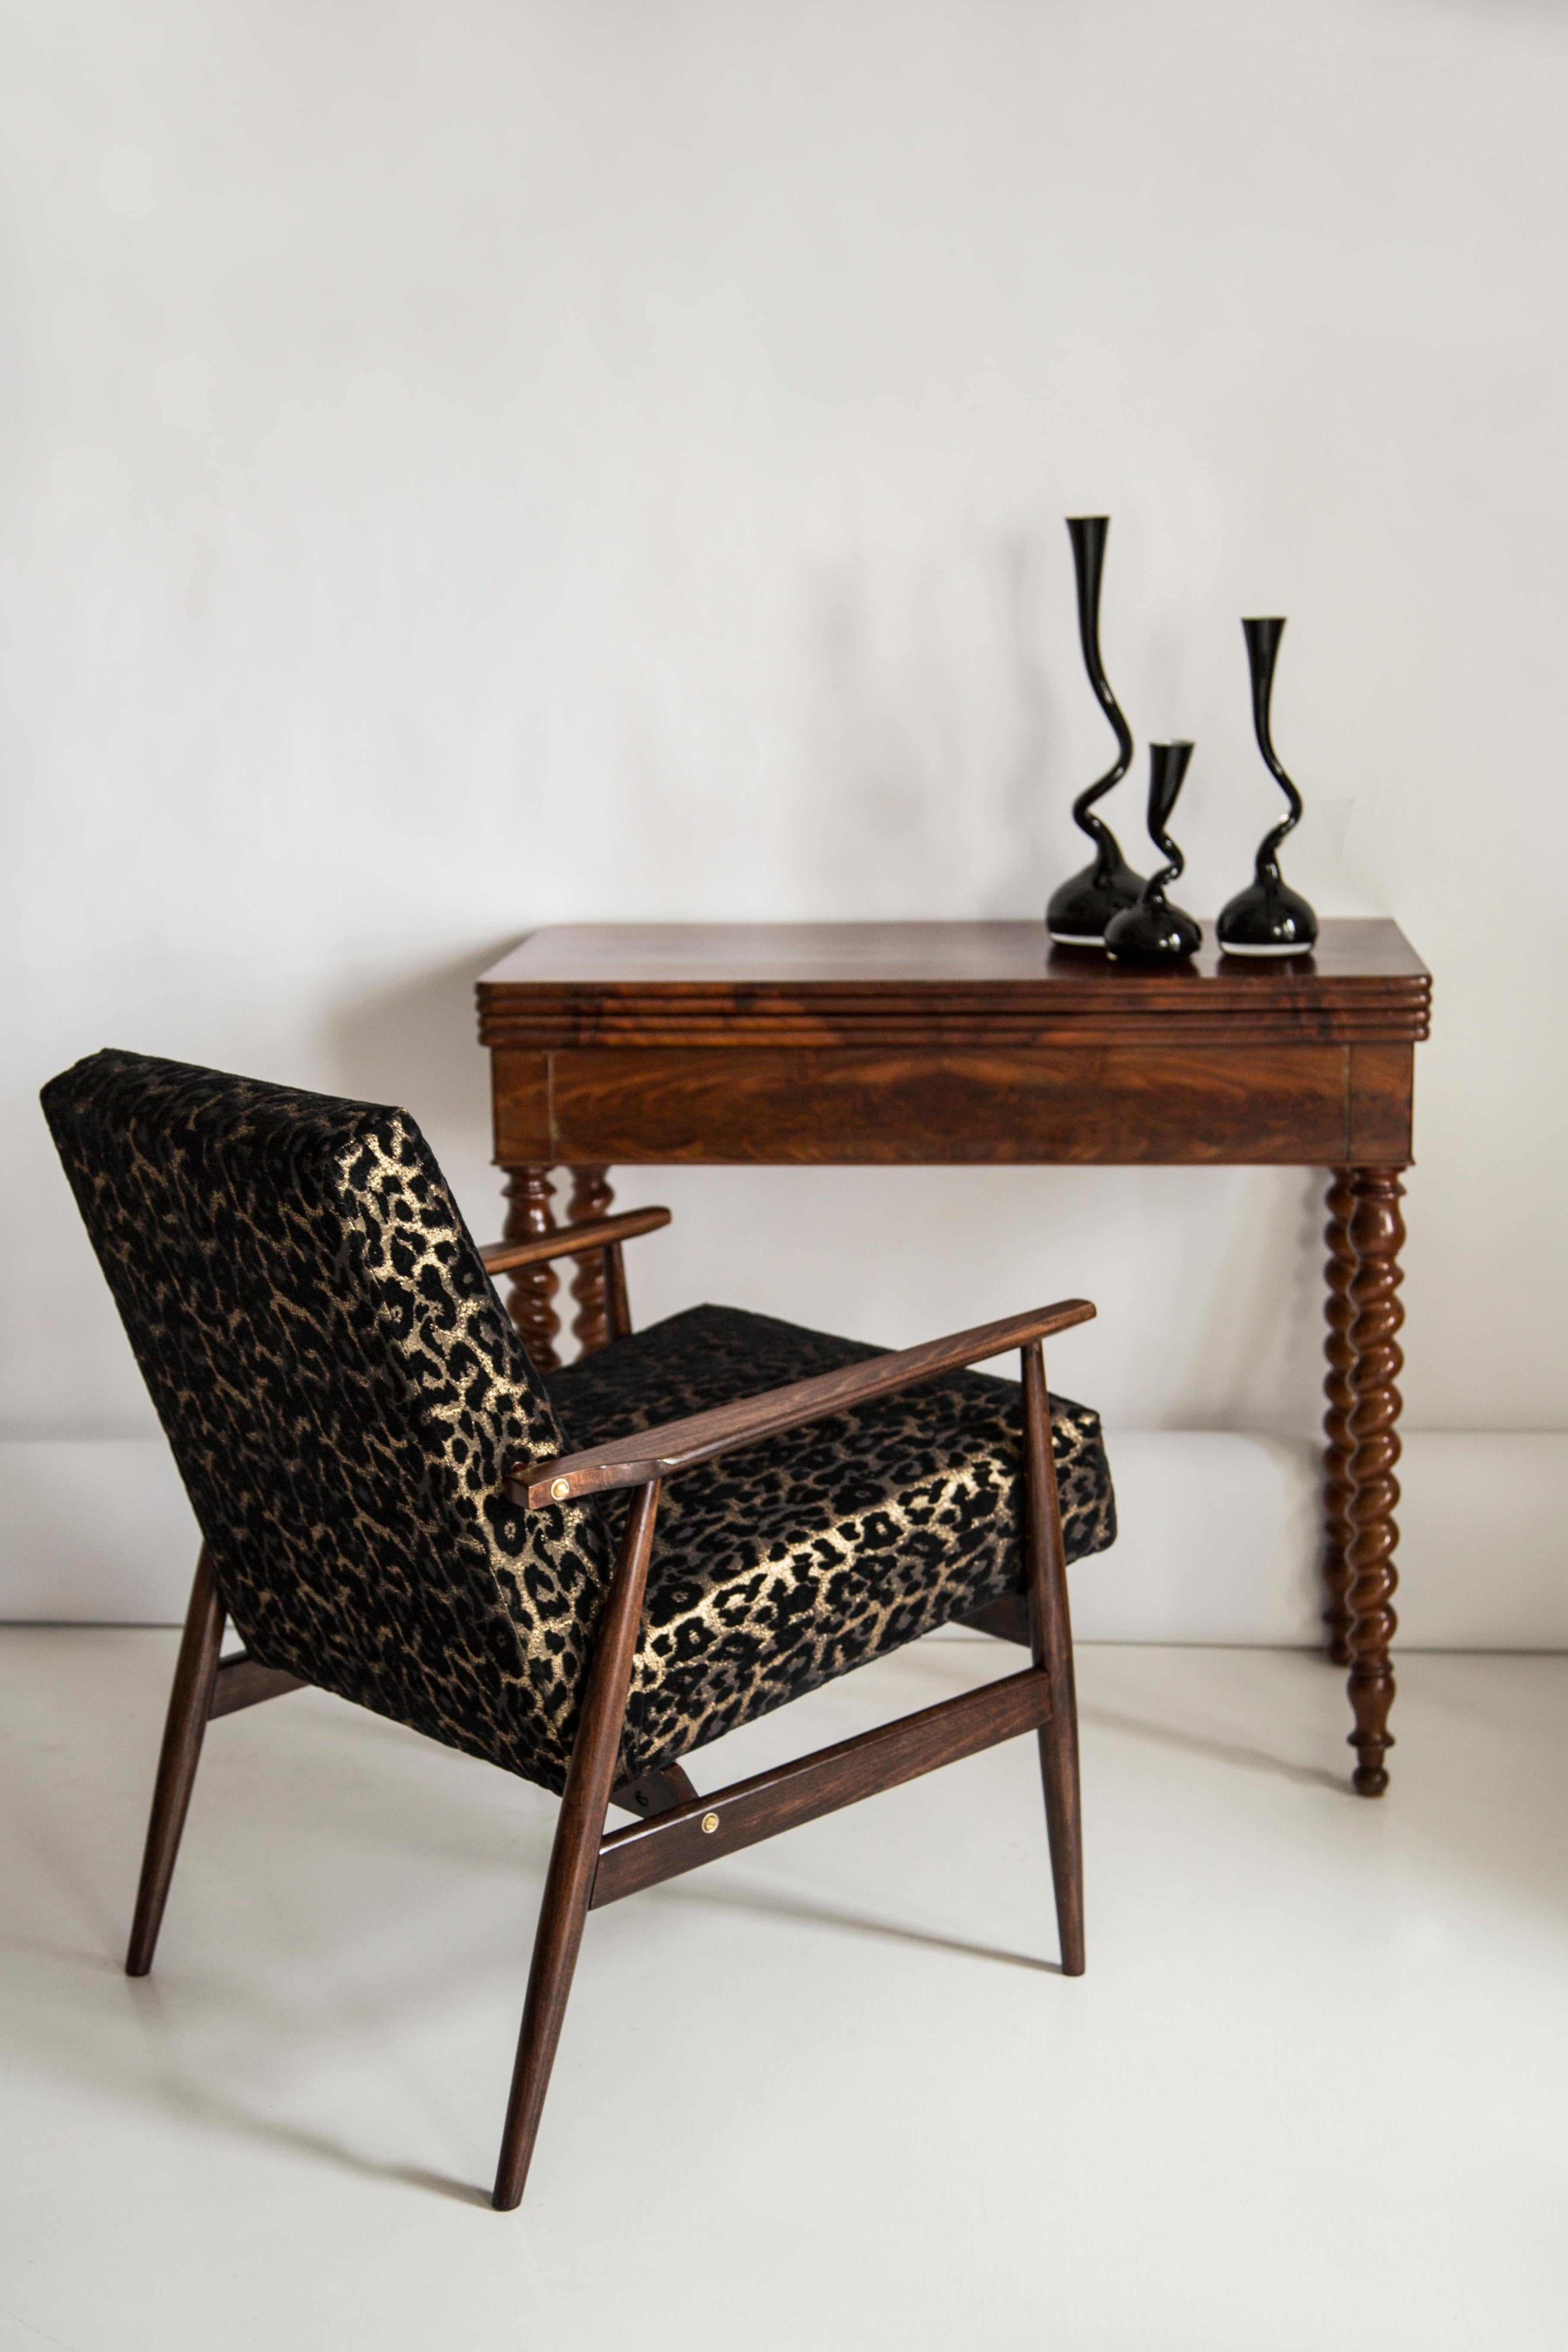 A beautiful, restored armchair designed by Henryk Lis. Furniture after full carpentry and upholstery renovation. The fabric, which is covered with a backrest and a seat, is a high-quality Italian velvet upholstery printed in leopard pattern. The